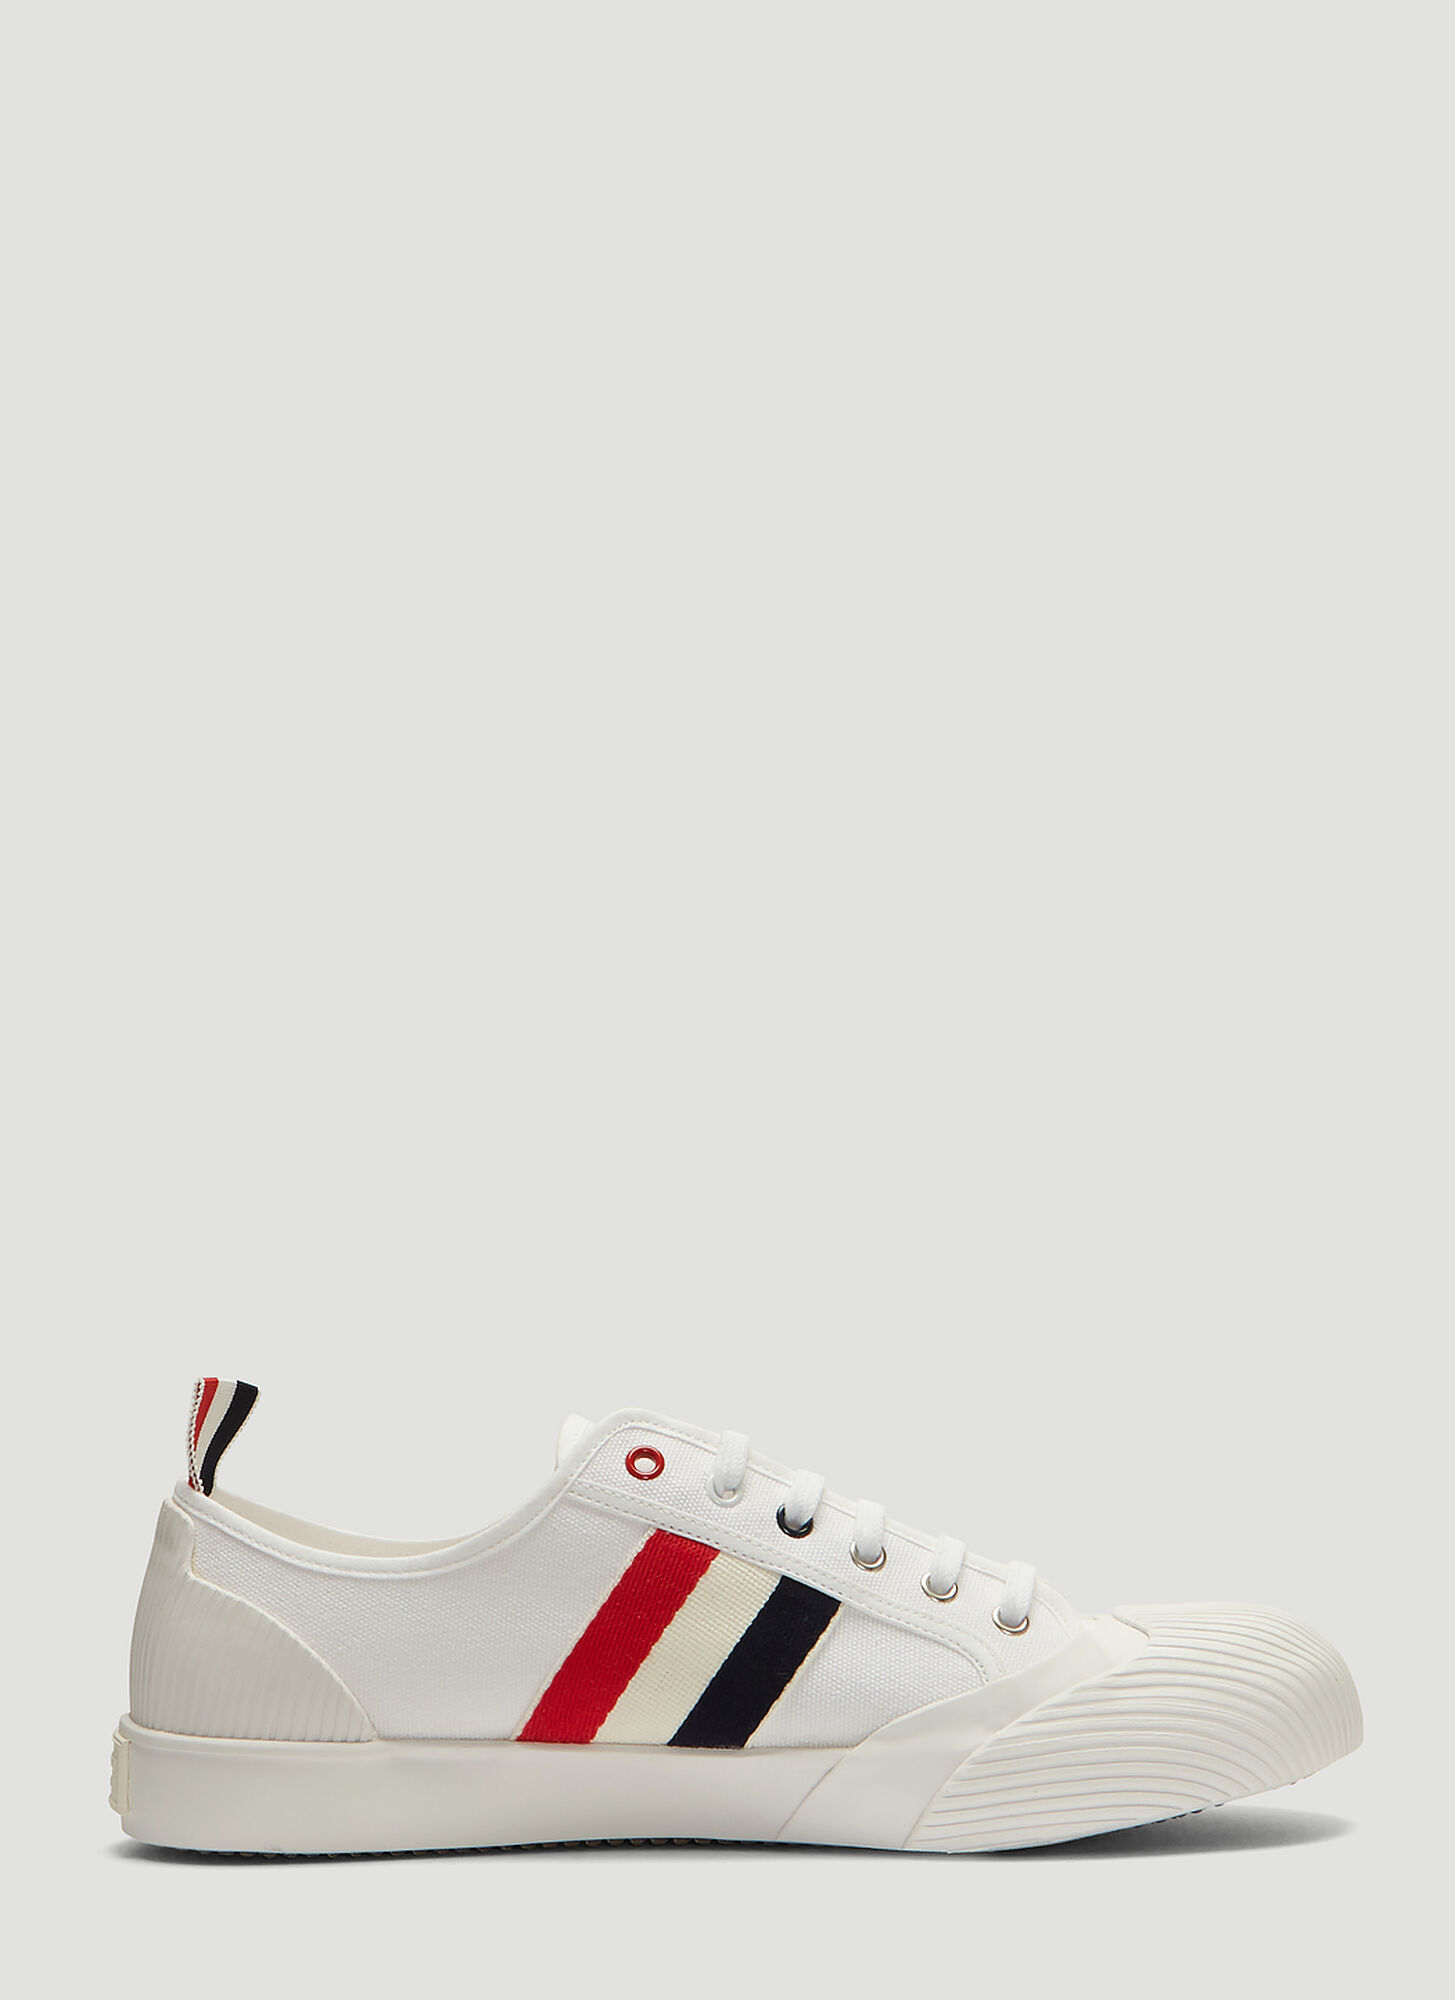 Thom Browne Low-Top Canvas Sneakers in White size US - 10 | The Fashionisto